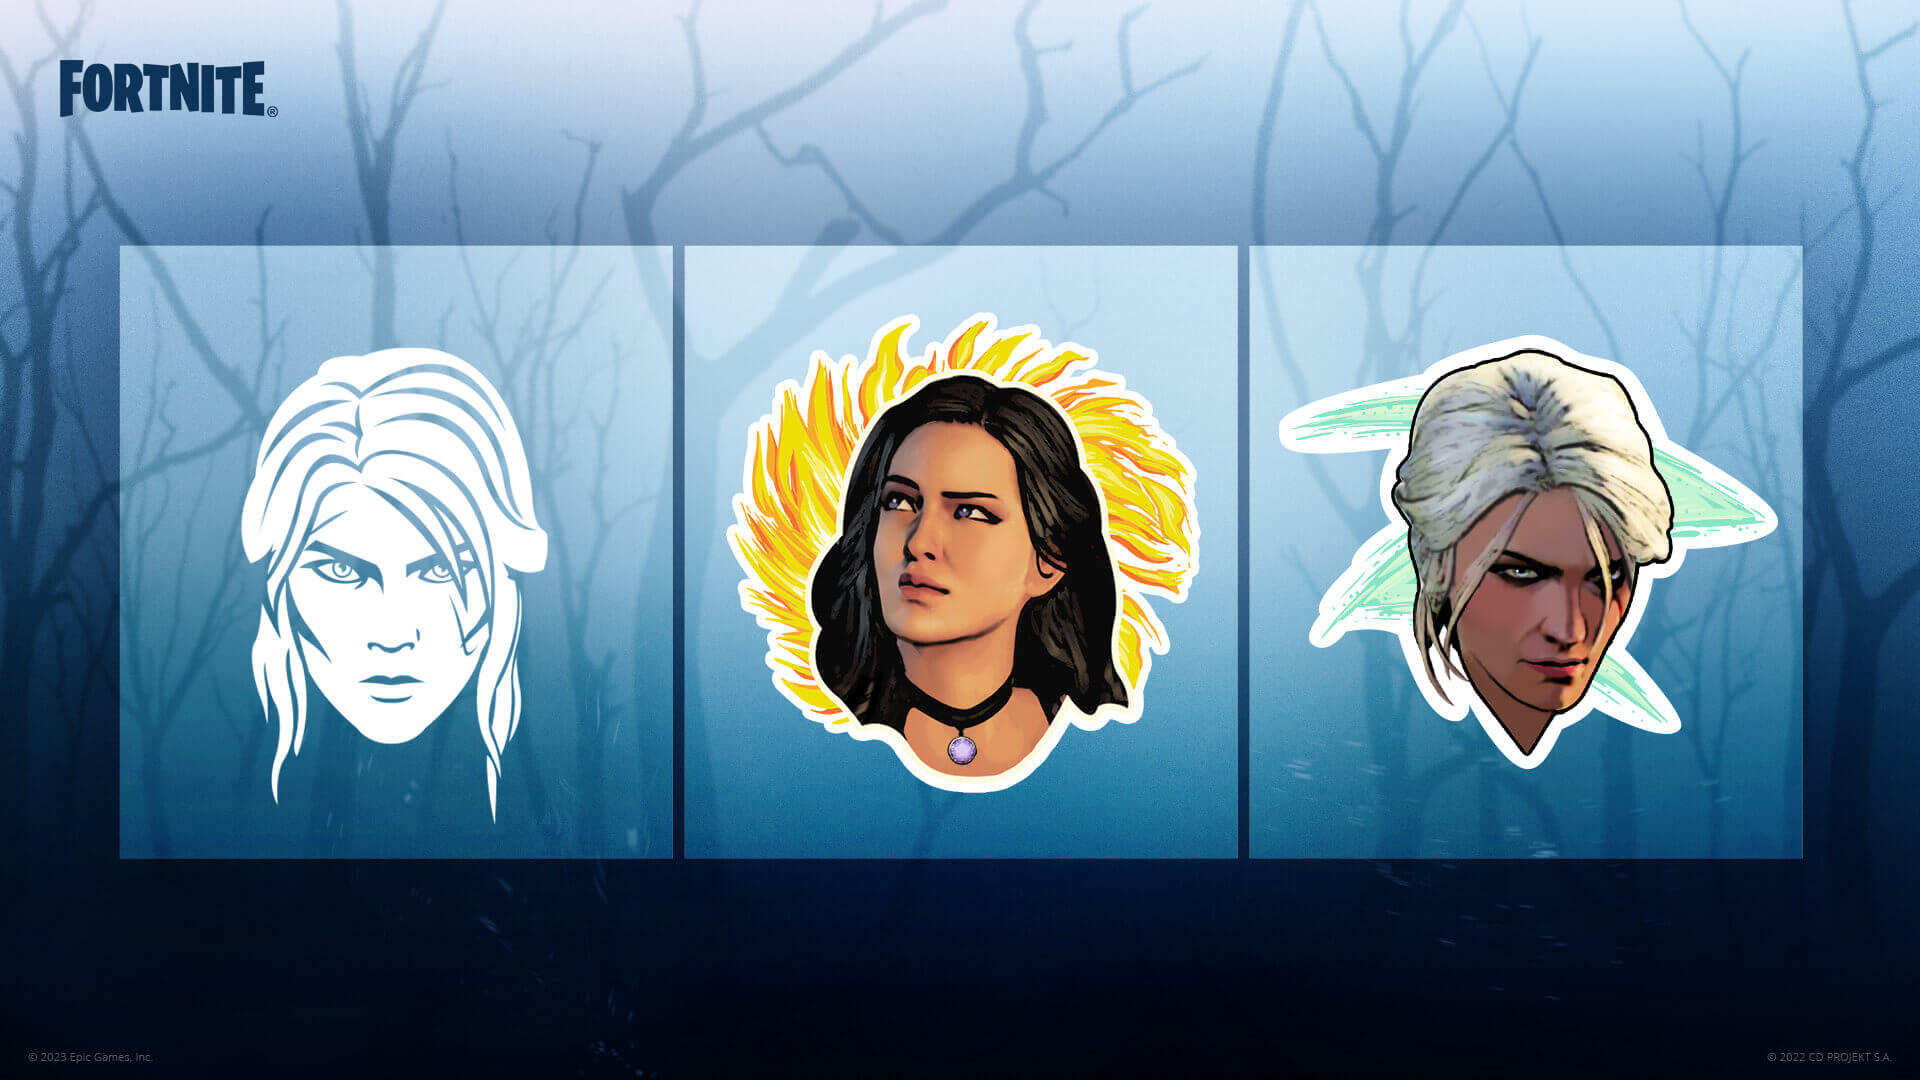 The new emotes and banner you can earn if you complete both islands in the new Fortnite Witcher crossover